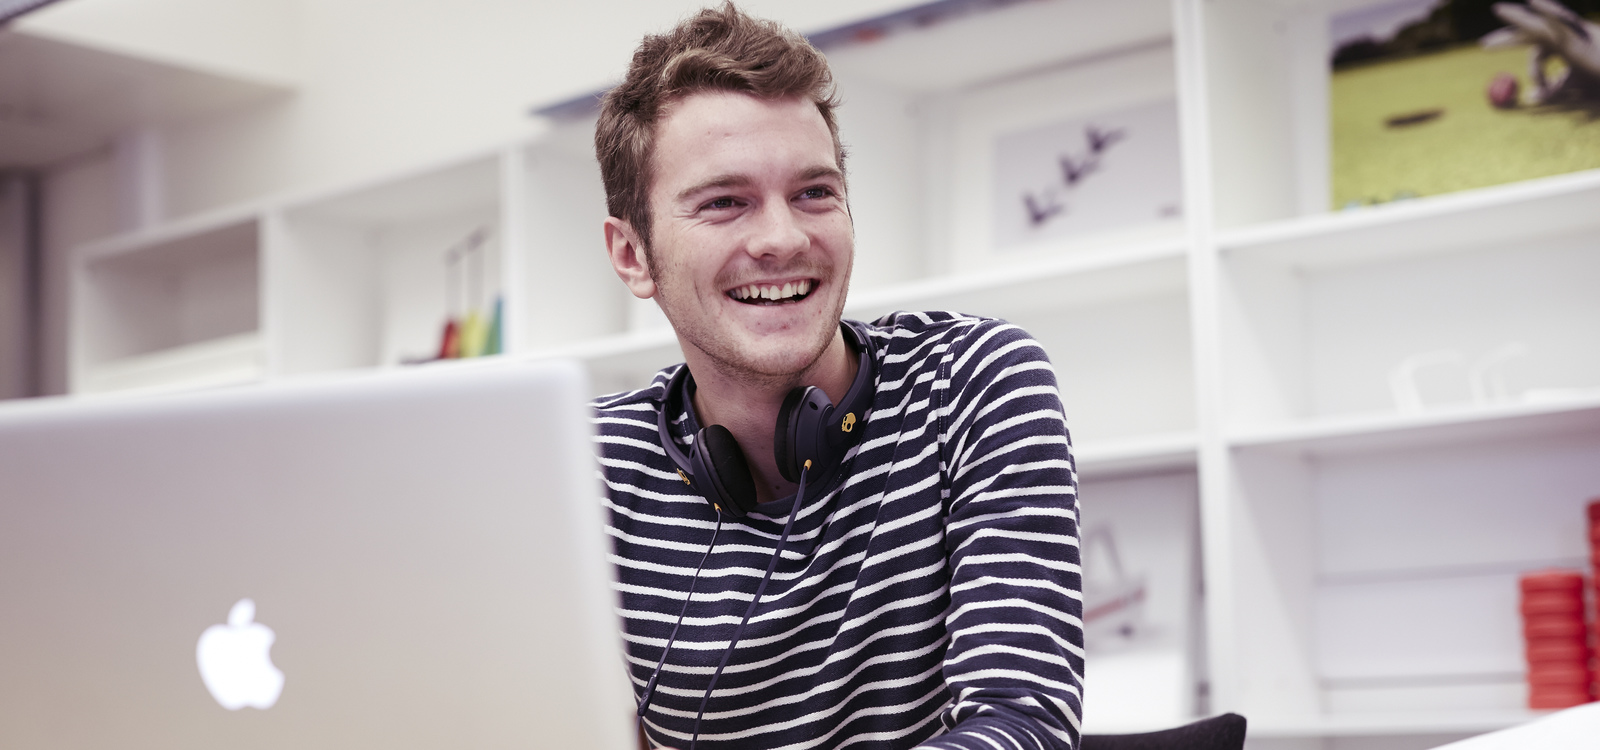 Male student smiling while working on a laptop